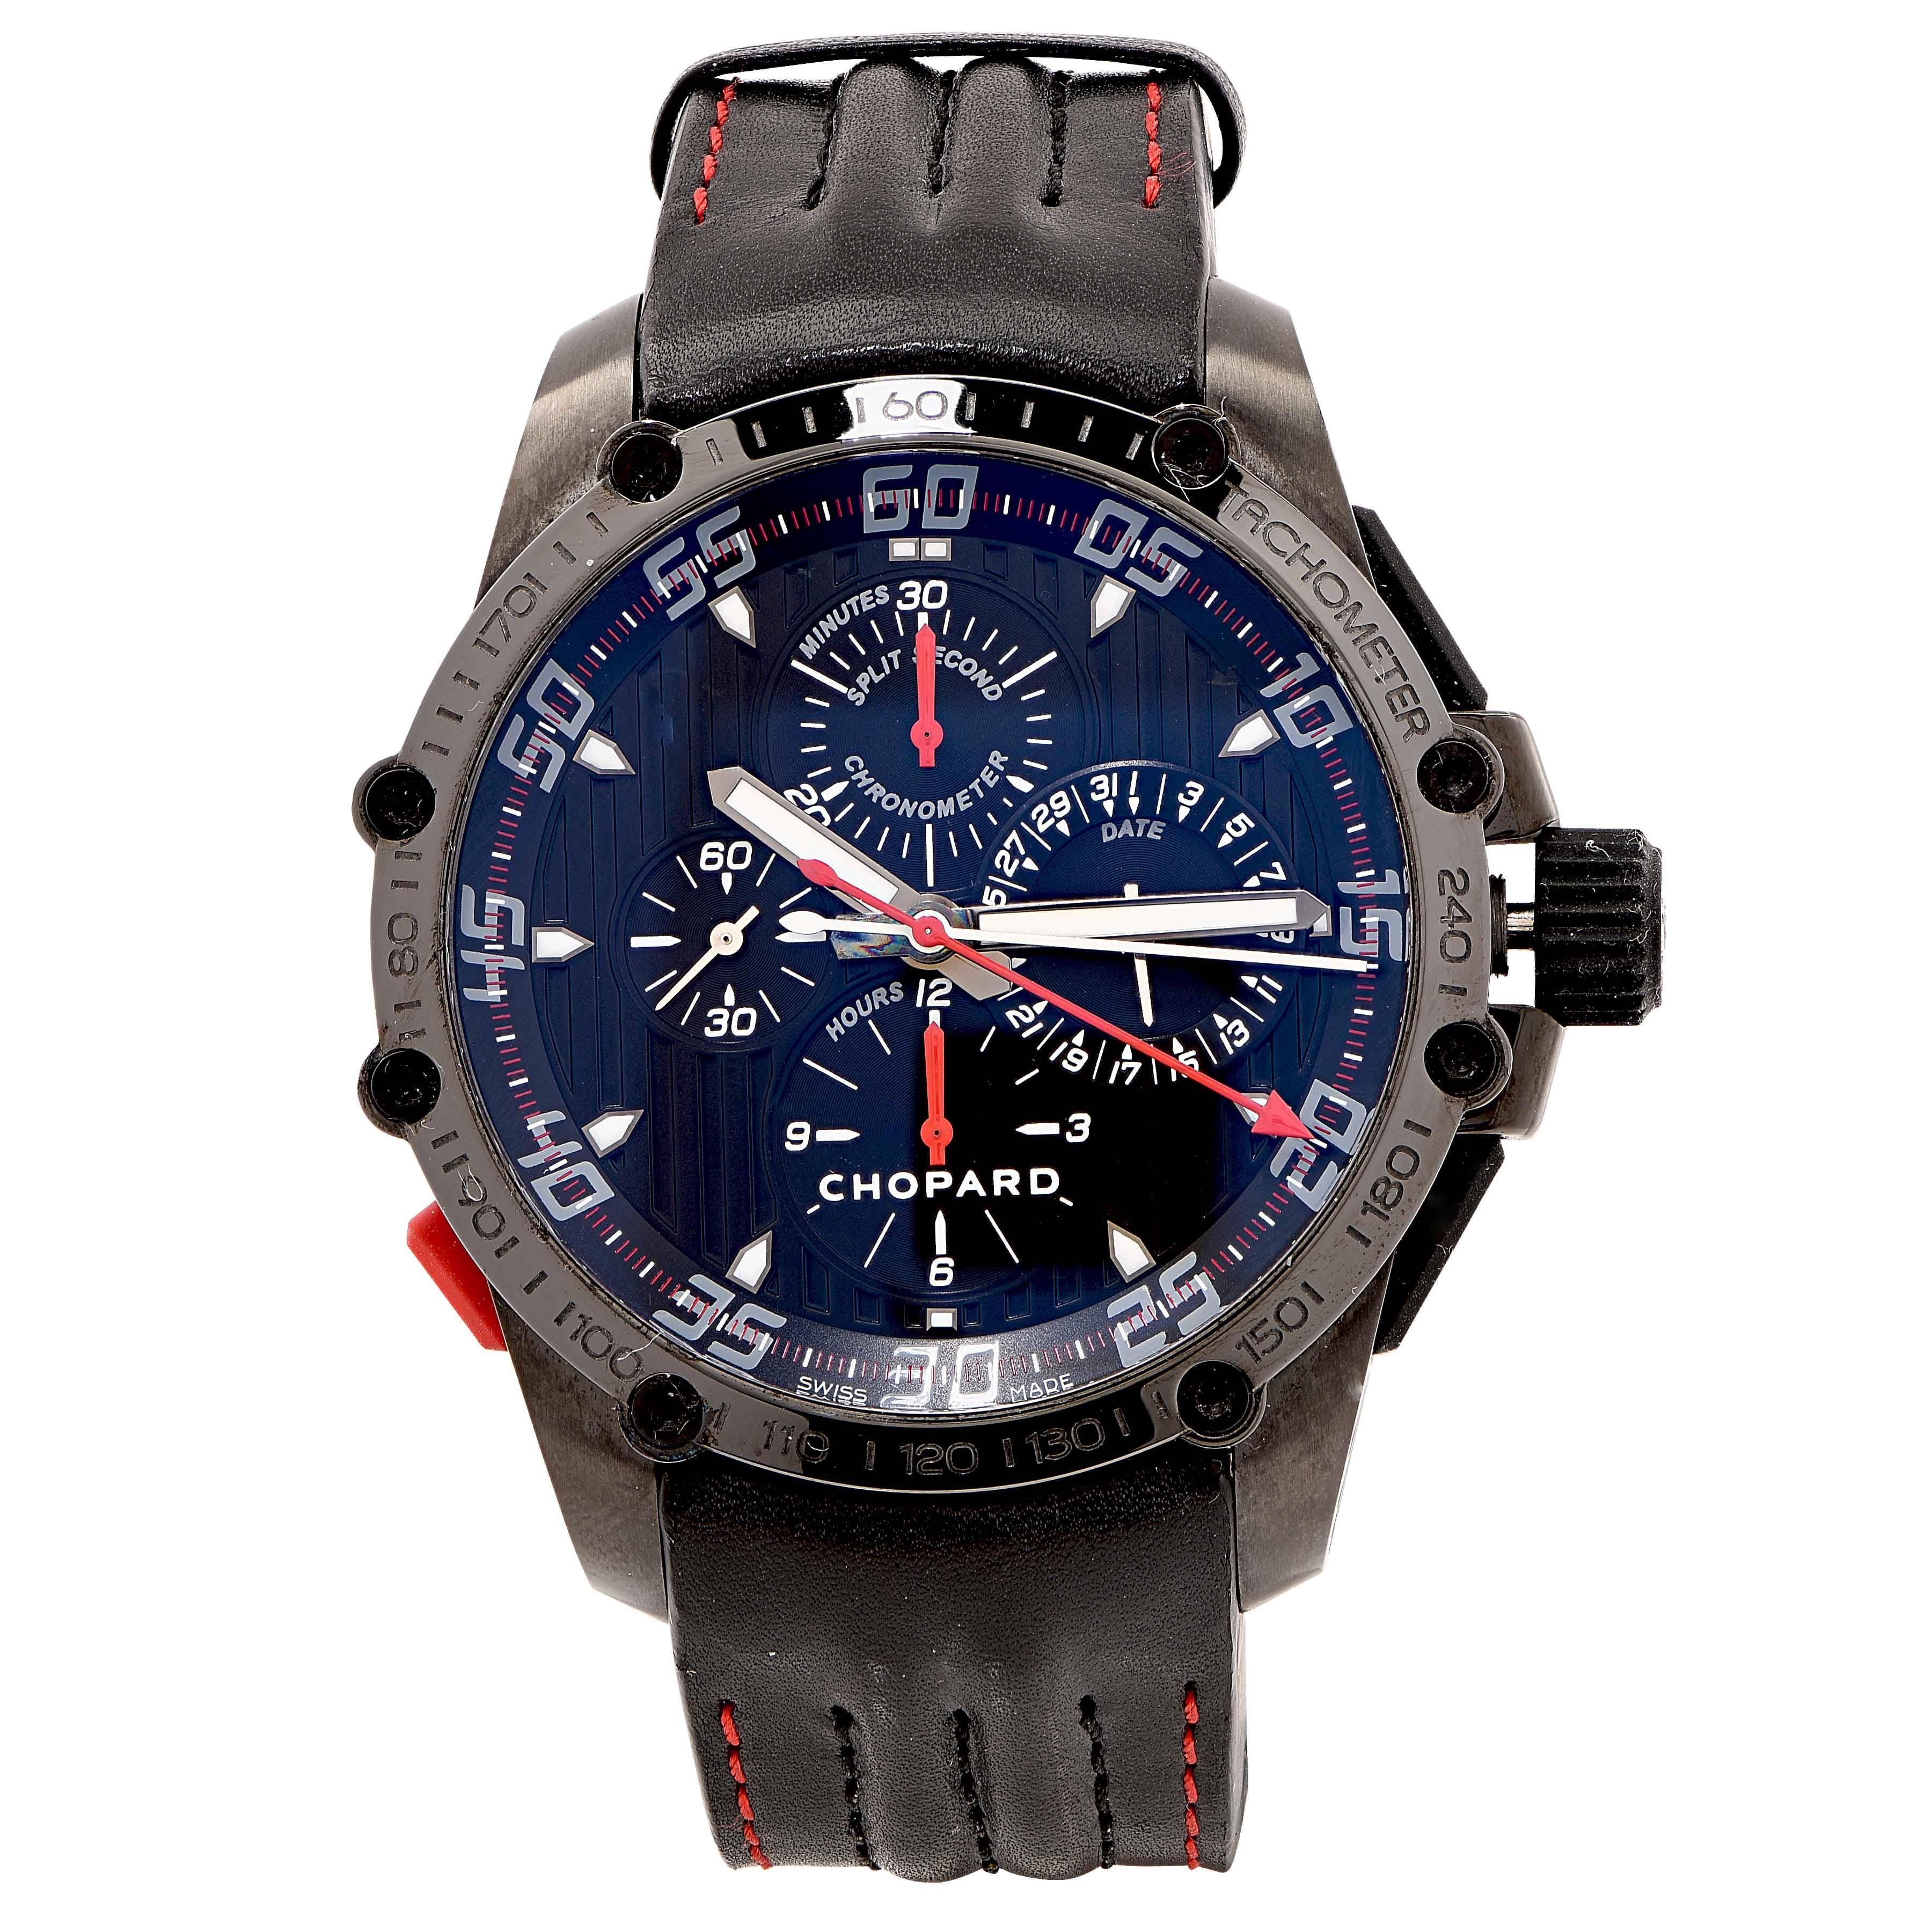 New With Box and Papers Chopard Superfast Split Second Chronograph    Model #168542-3001 The Superfast collection is the superlative sports collection. The imposing case of this Superfast Chrono Split Second watch in DLC blackened steel gives it a